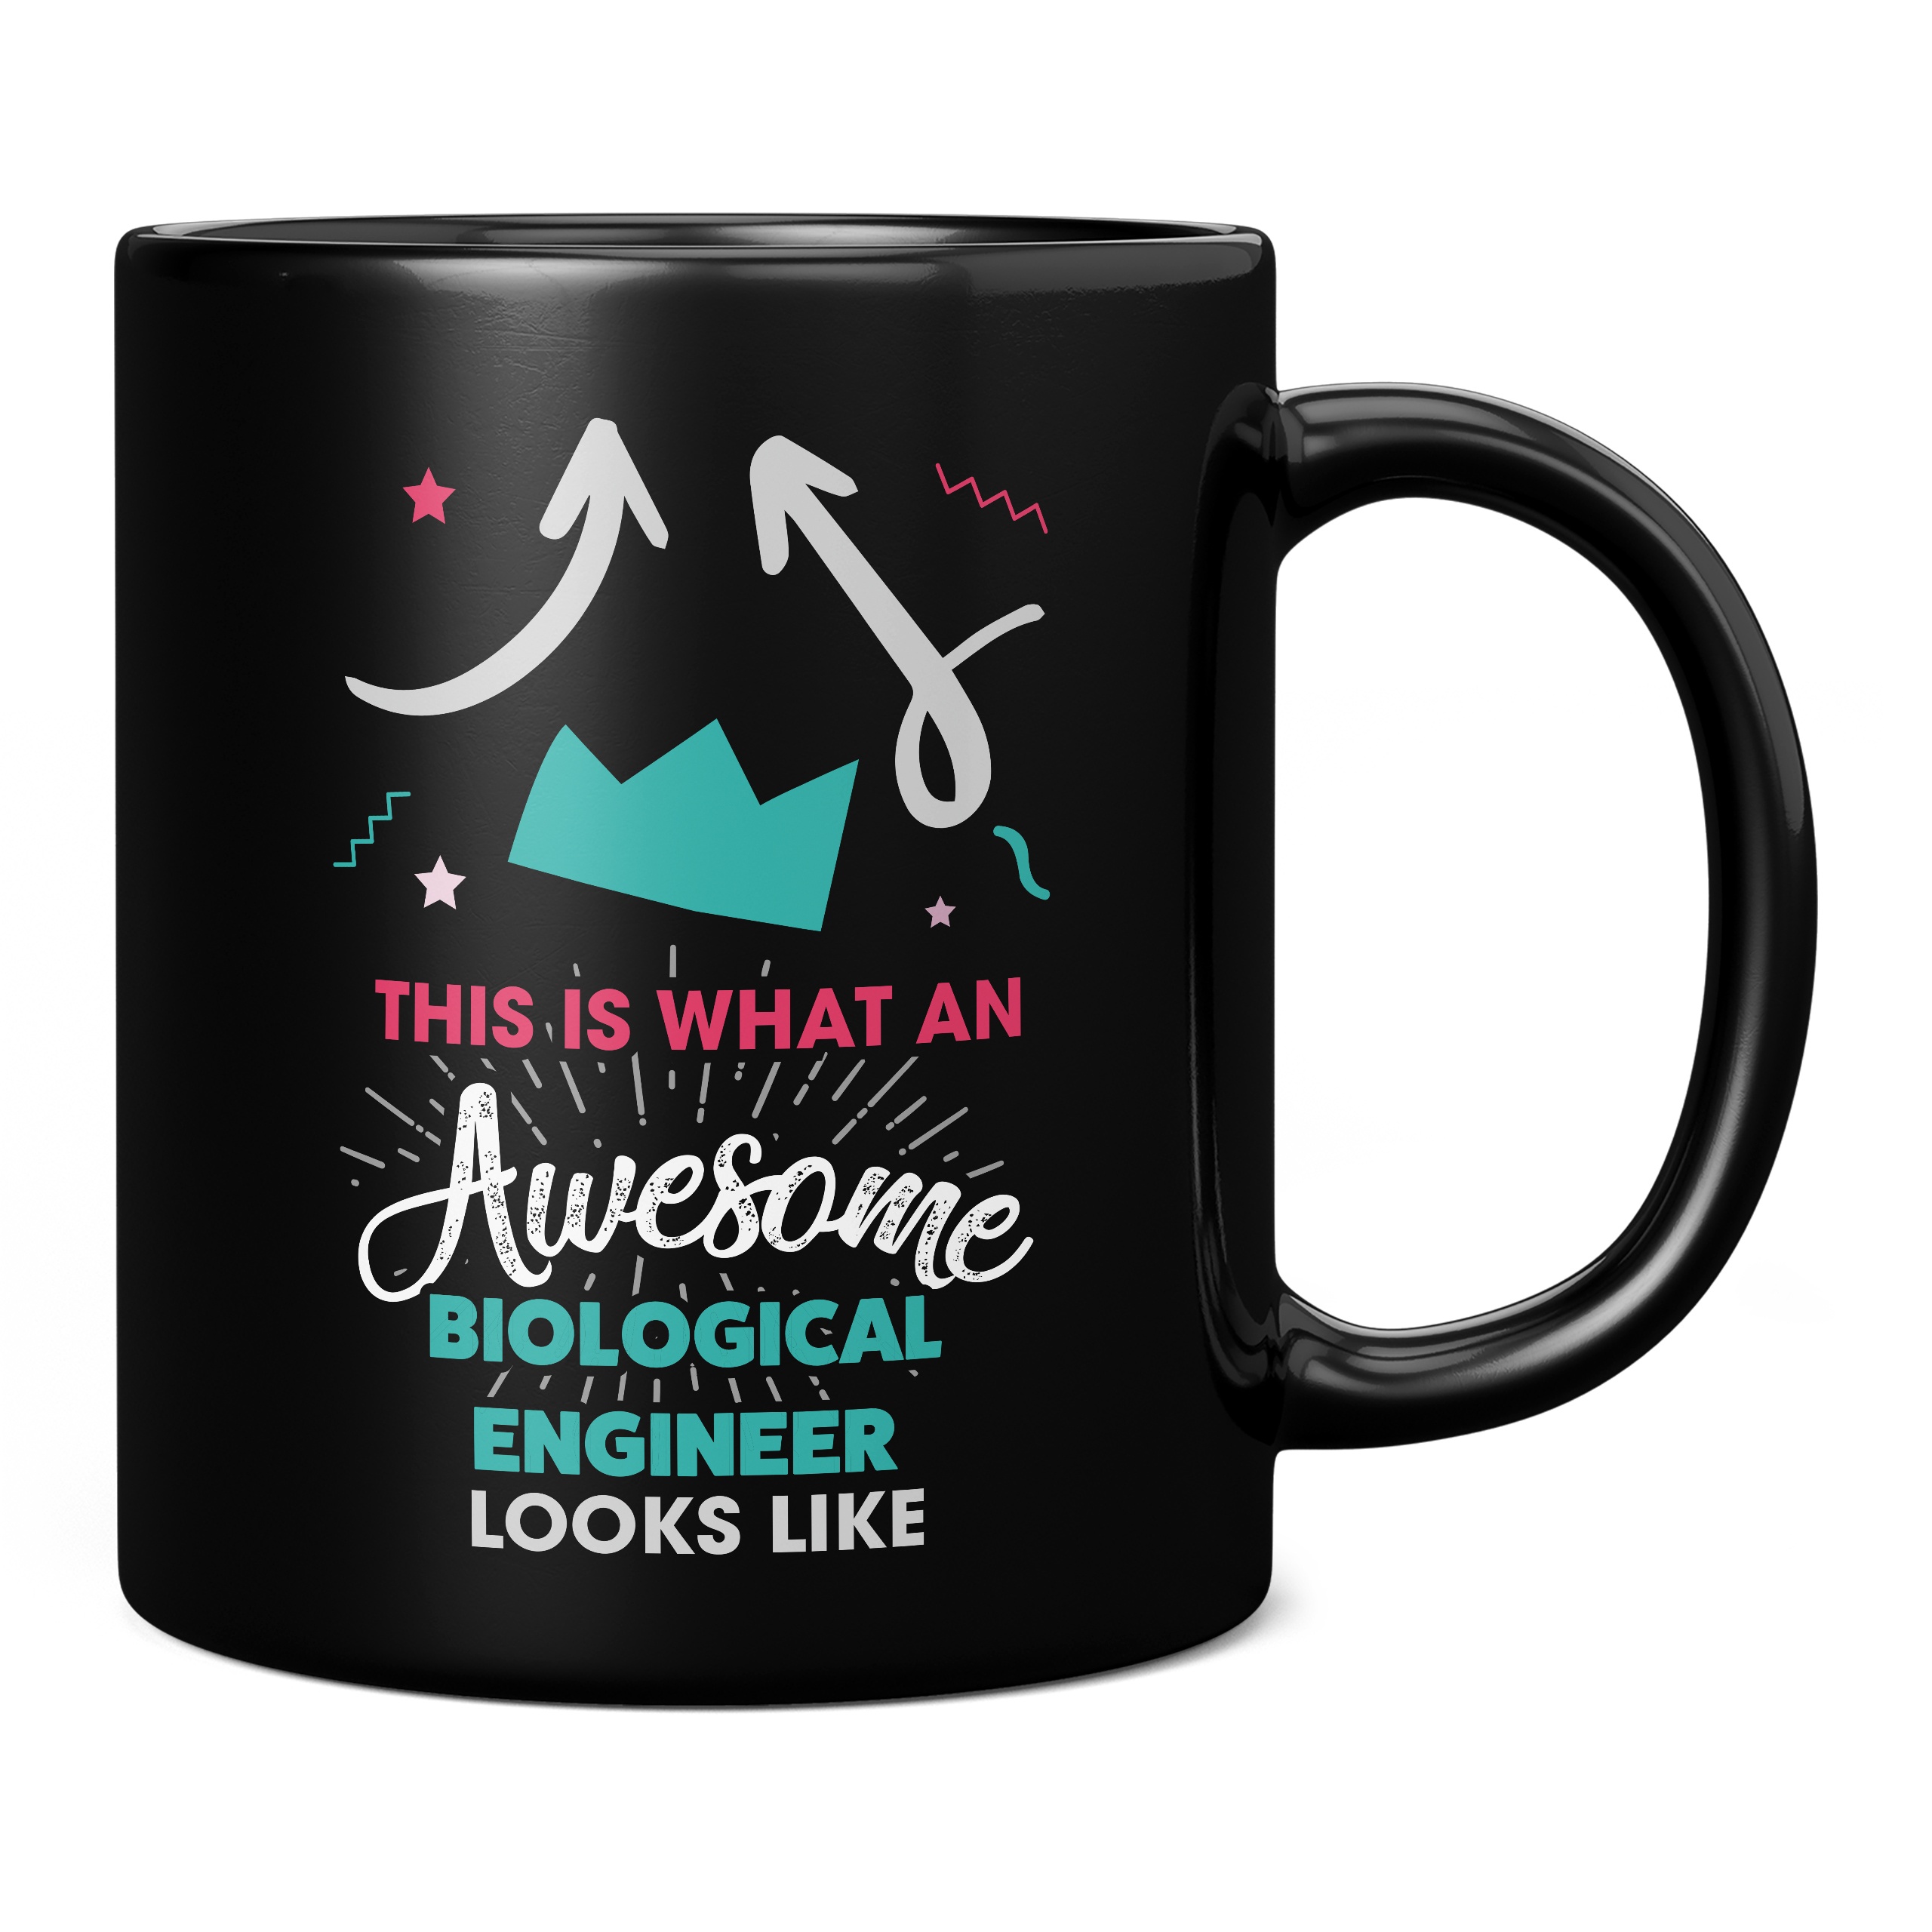 THIS IS WHAT AN AWESOME BIOLOGICAL ENGINEER LOOKS LIKE 11OZ NOVELTY MUG